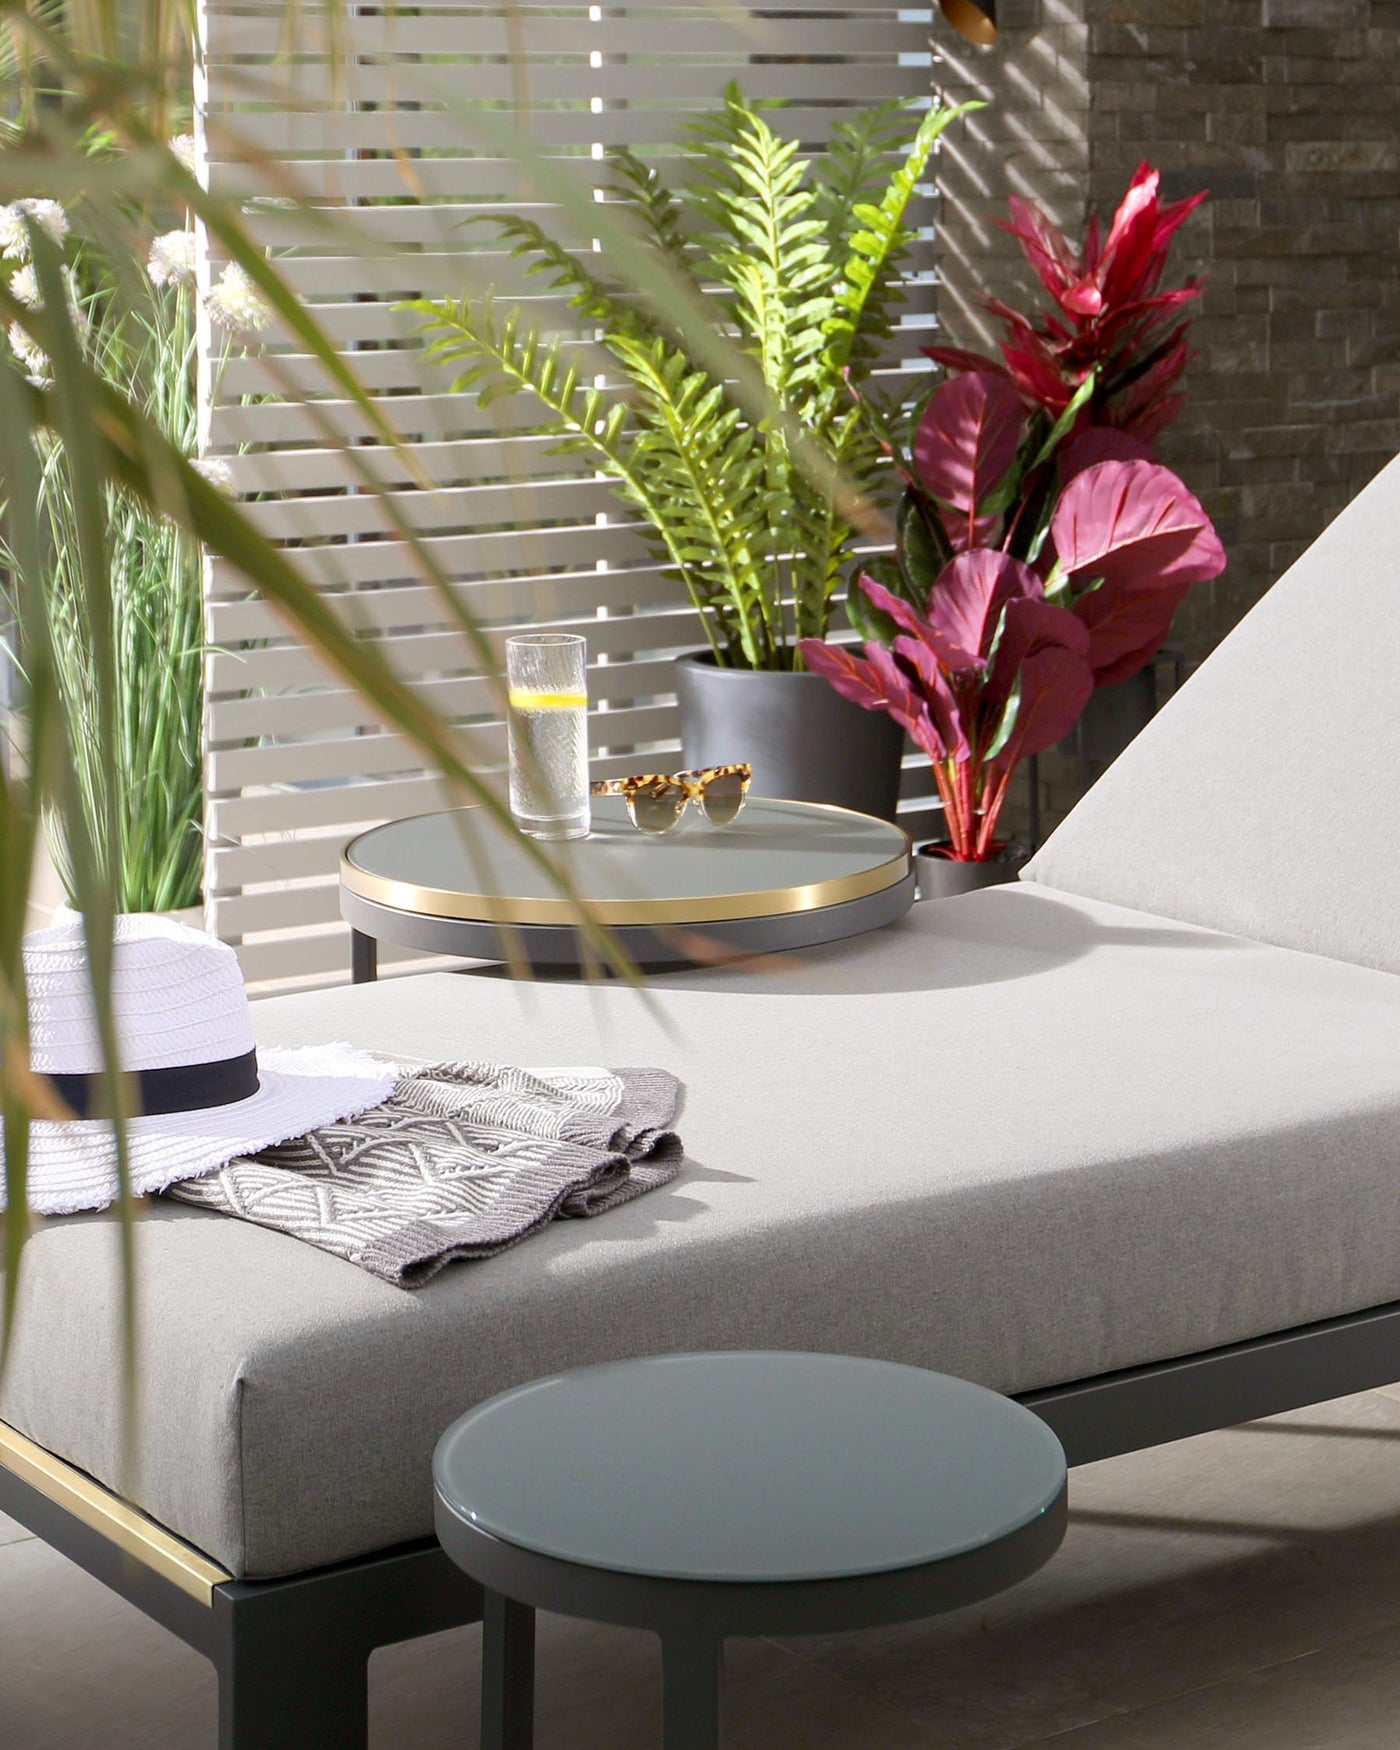 Modern outdoor furniture featuring a sleek, grey chaise lounge with black metal framing and a side table with a round, pale green top and black base. Additional circular centrepiece table with a golden rim and a two-tiered design, with the top displaying a glass of water and sunglasses. The setting is complemented by decorative plants, providing a fresh, natural ambiance.